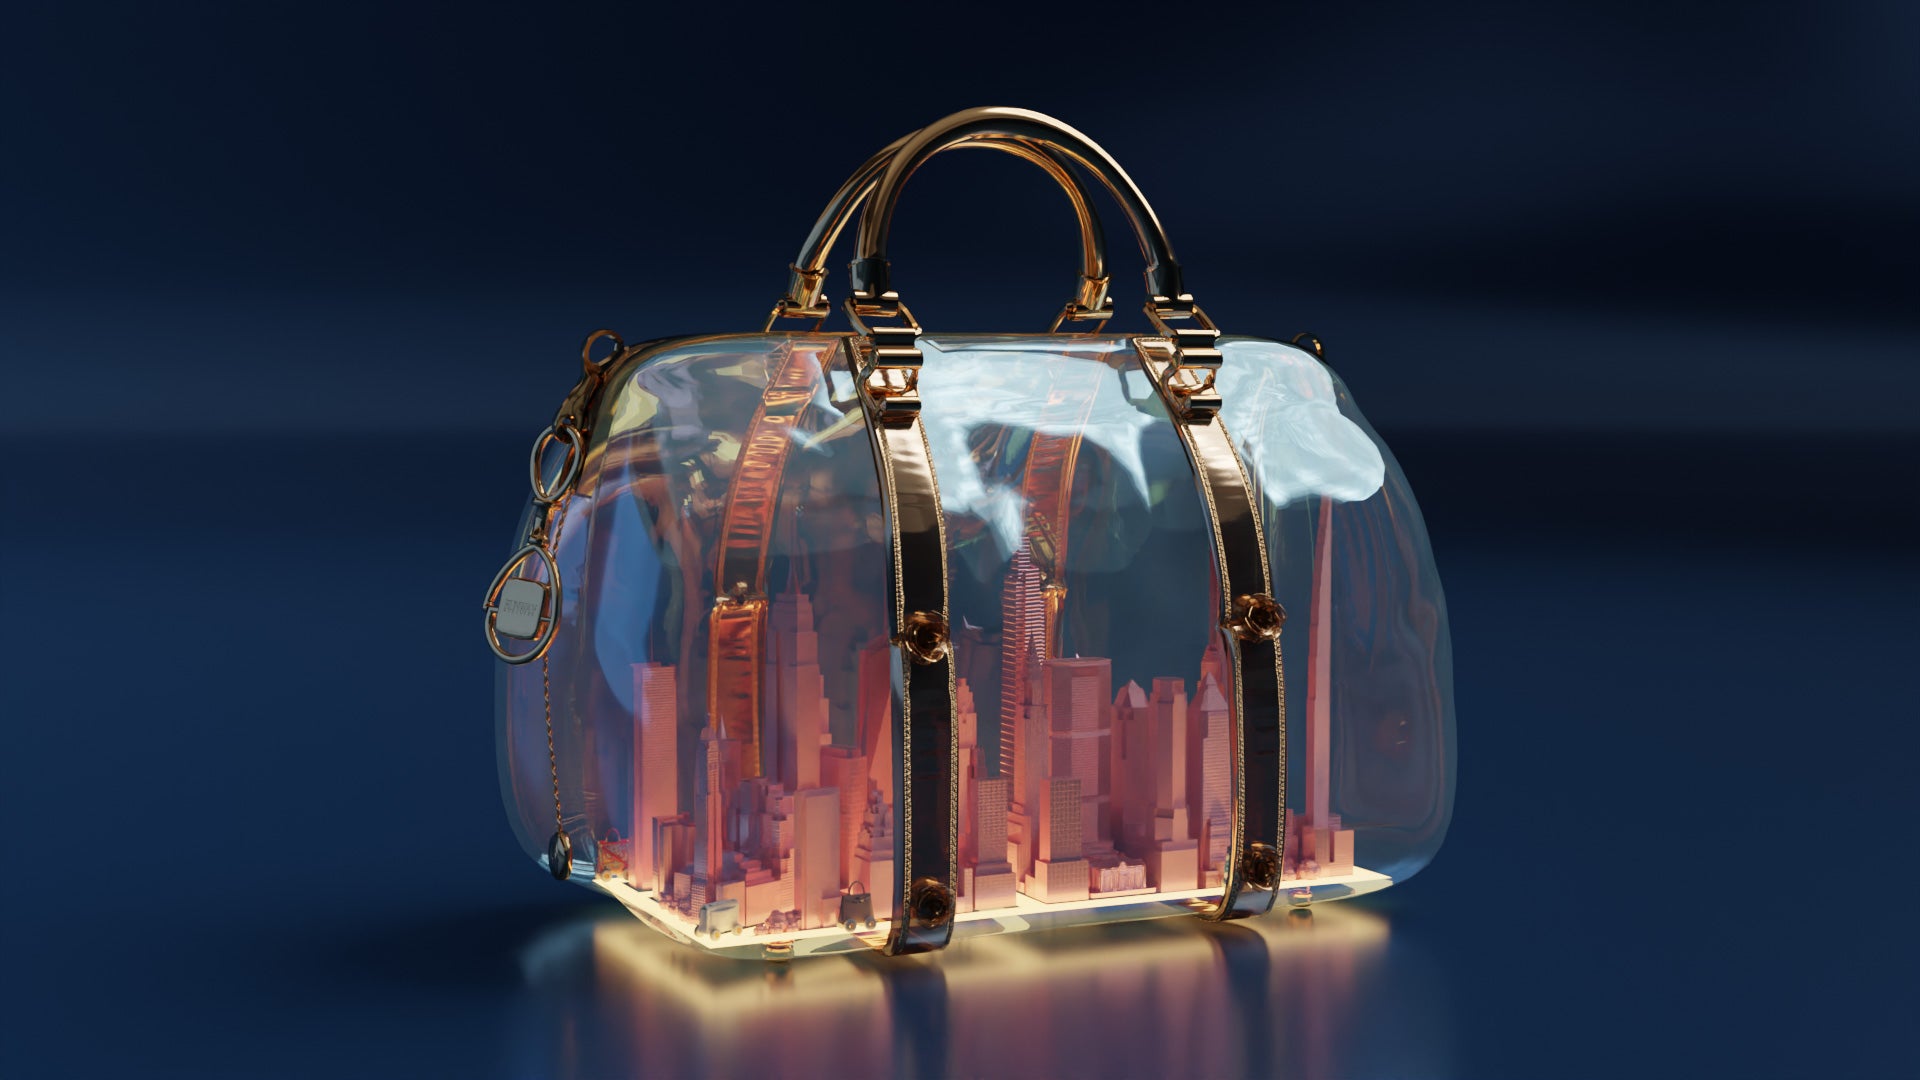 SM5 by Heledahn NYC Bag commision for Runway Magazine is a 3D model of a transparent bag with a miniature of NYC inside